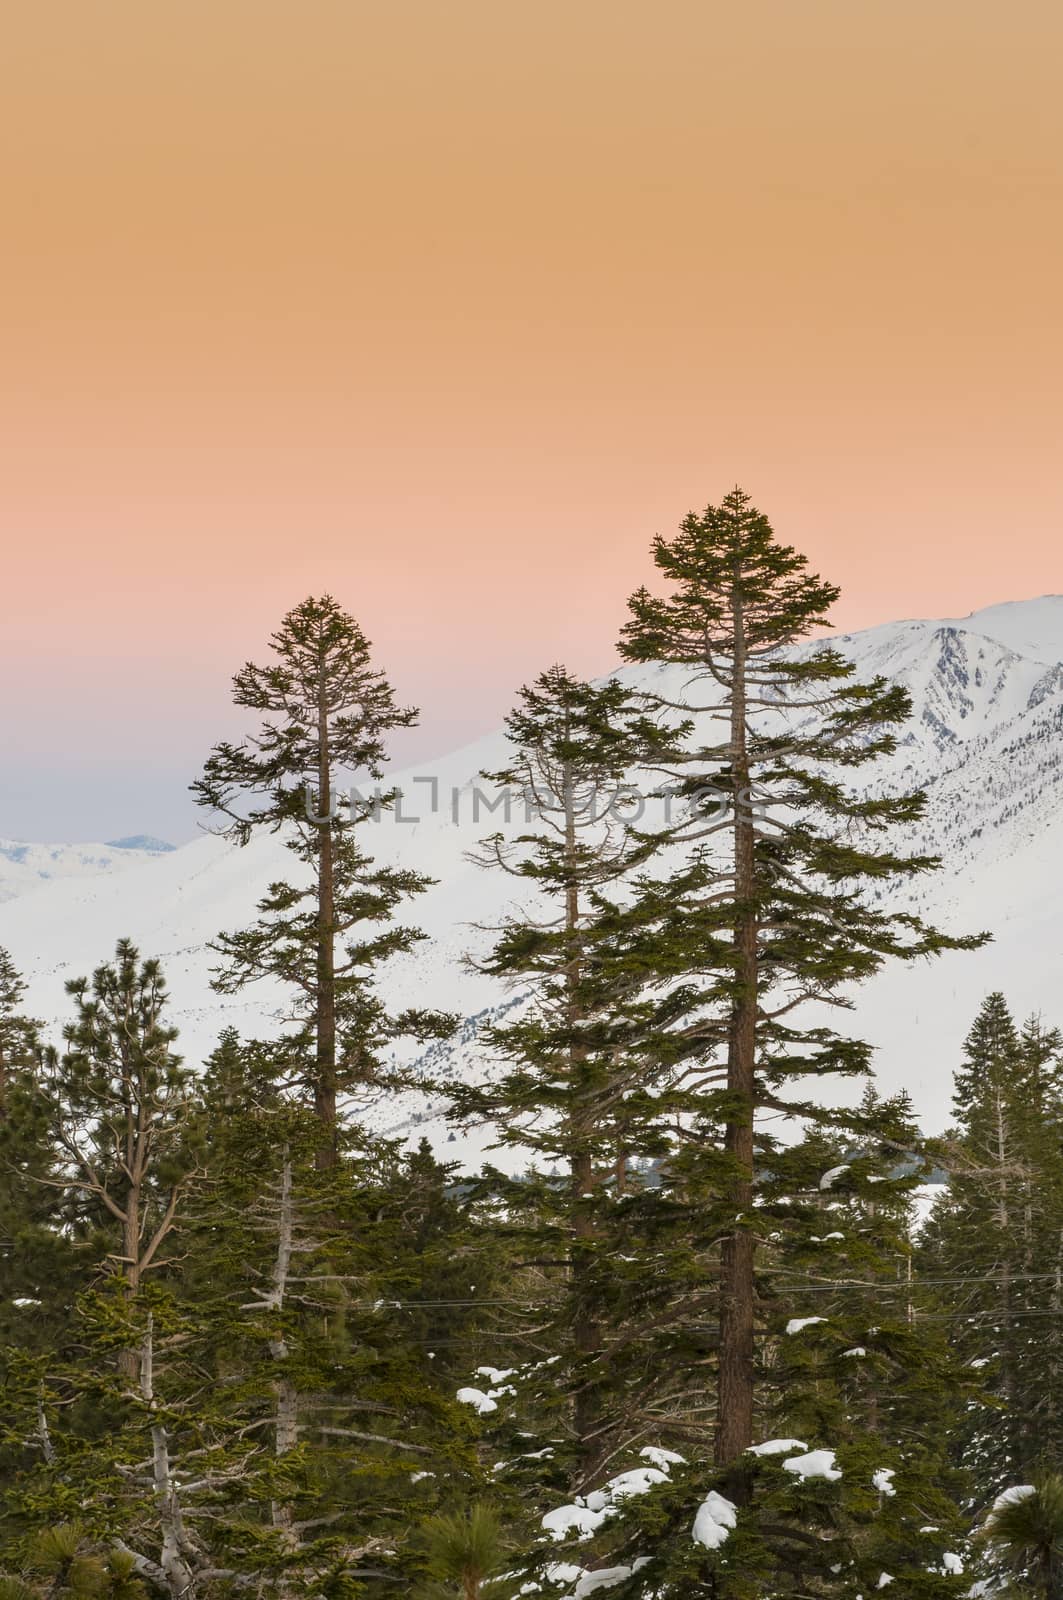 Sunset with pine trees and snow-capped mountains